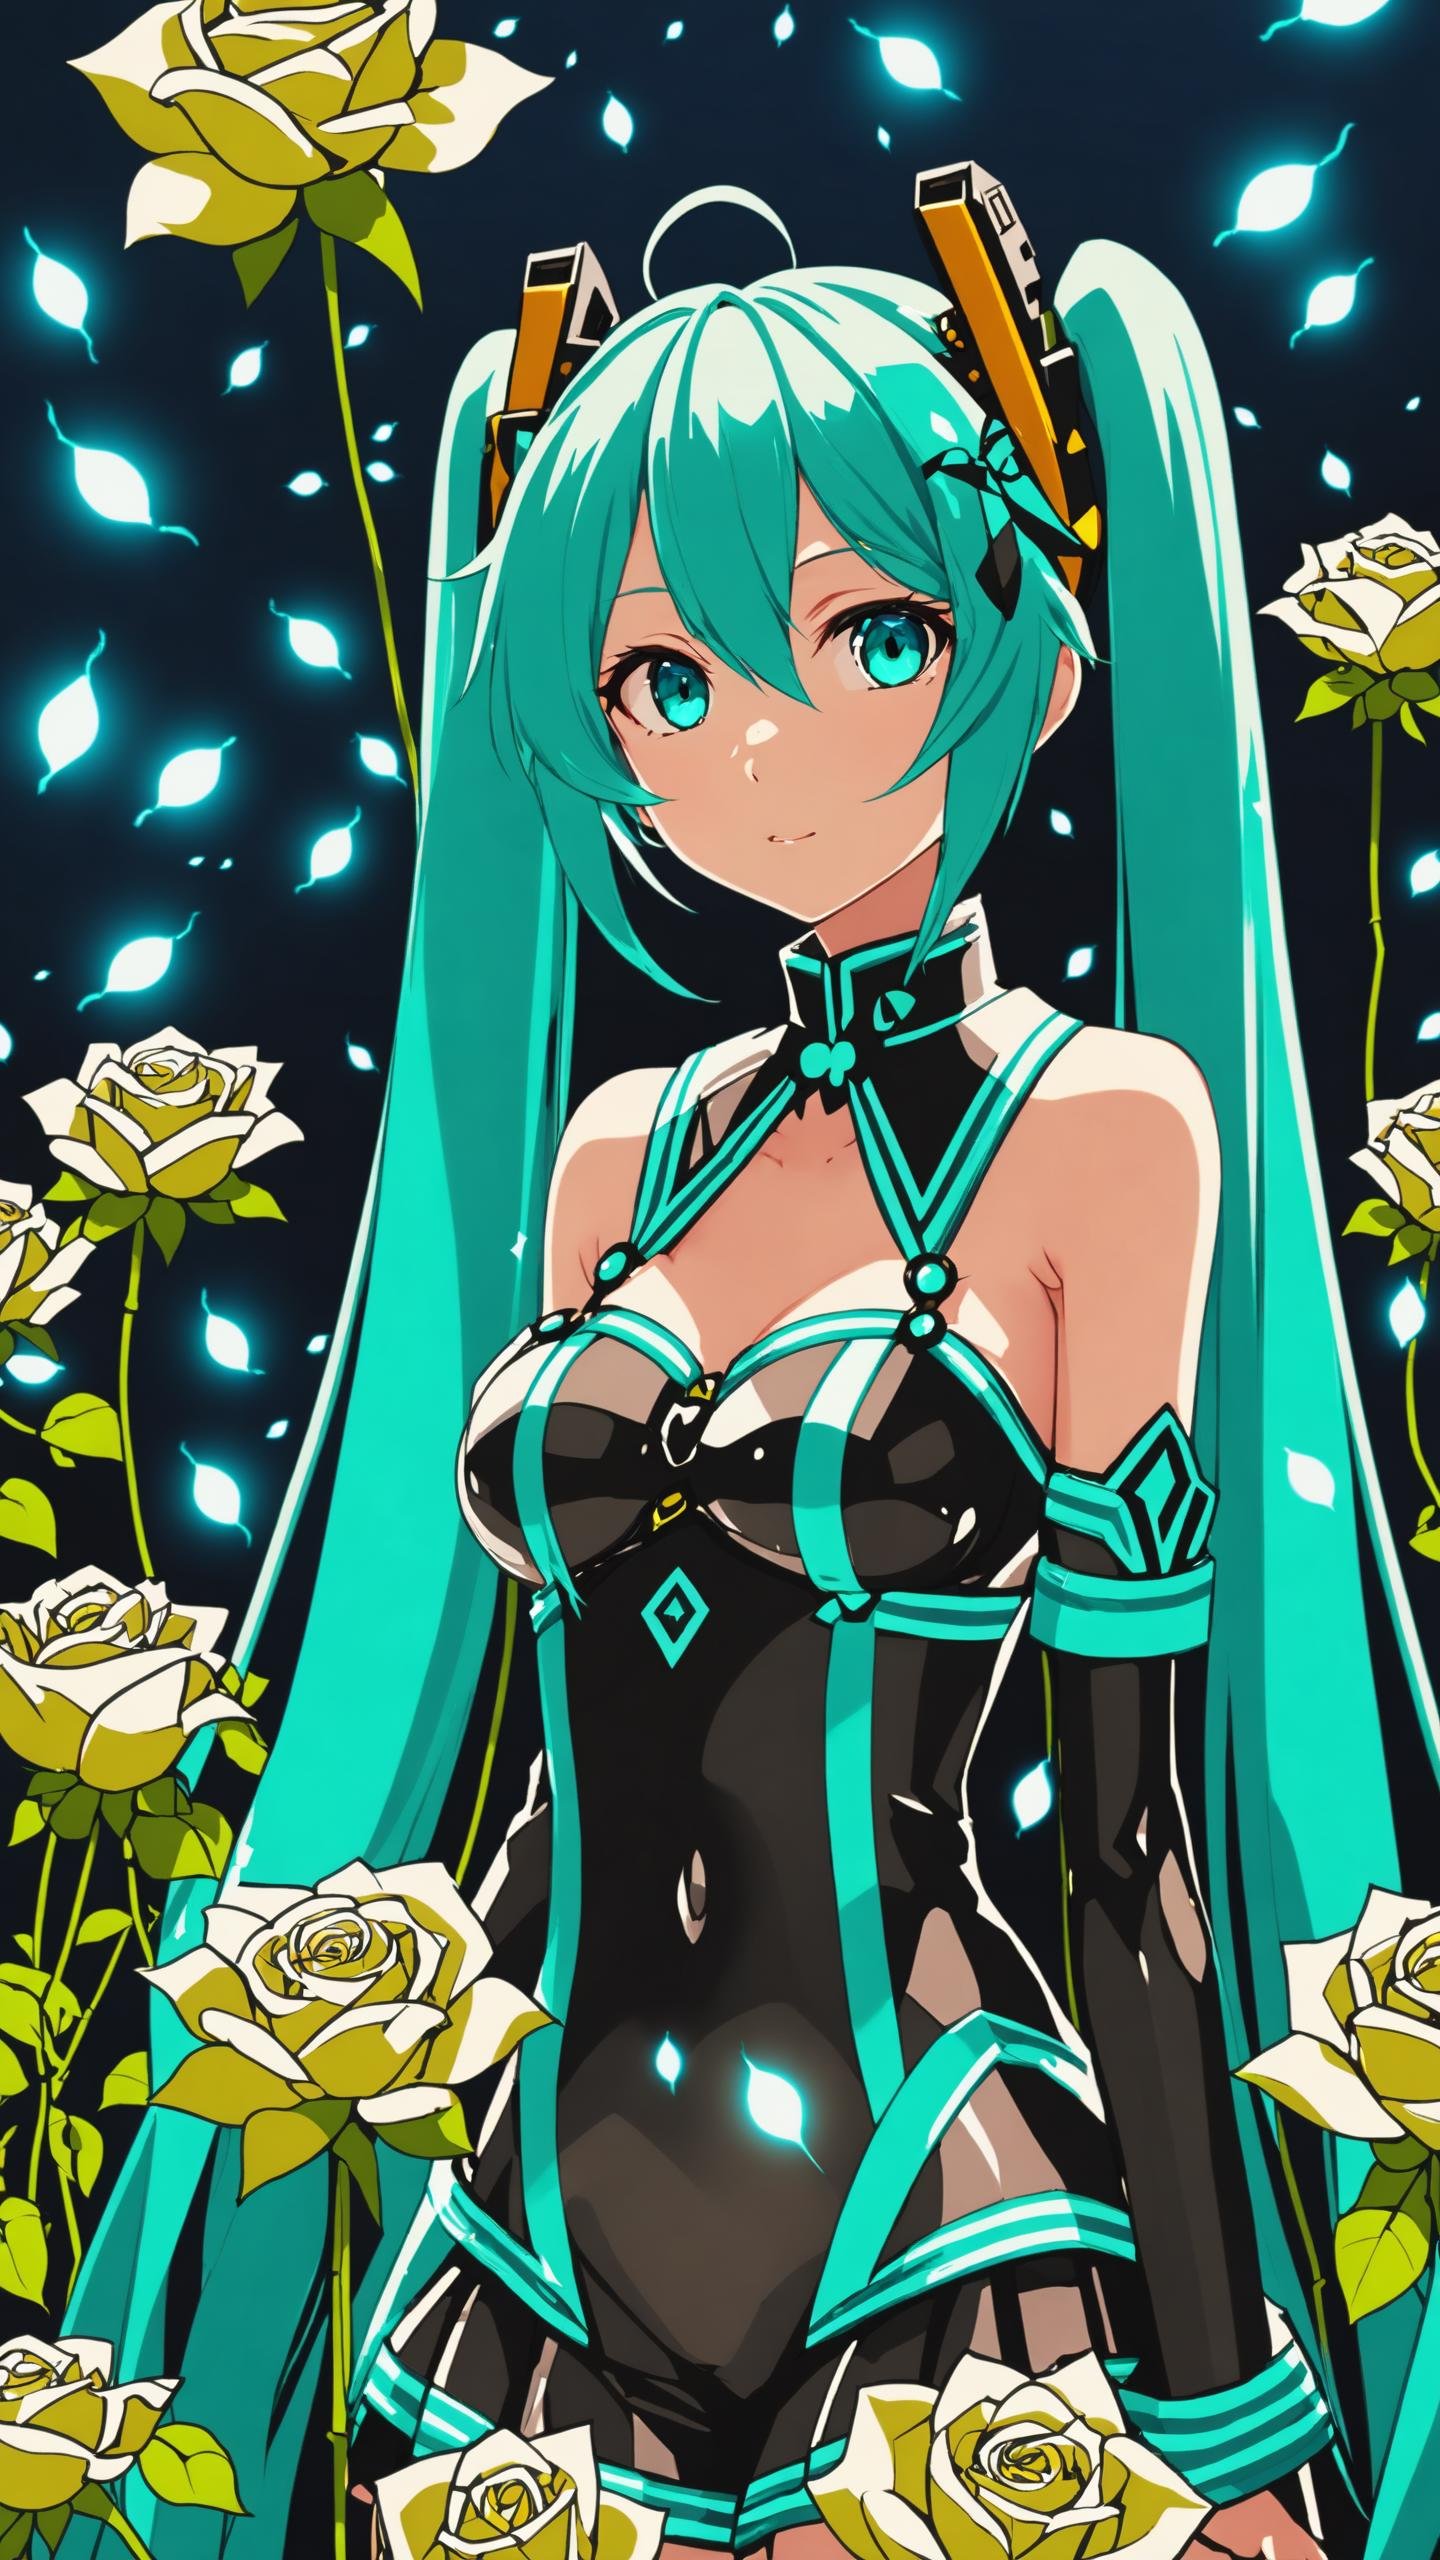 face focus, masterpiece, best quality, 1girl, Hatsune miku, goth Hatsune miku, latex clothing, suggestive face, hentai face, white roses, petals, night background, fireflies, light particle, solo, aqua hair with twin tails, aqua eyes, standing, pixiv, depth of field, cinematic composition, best lighting, looking up